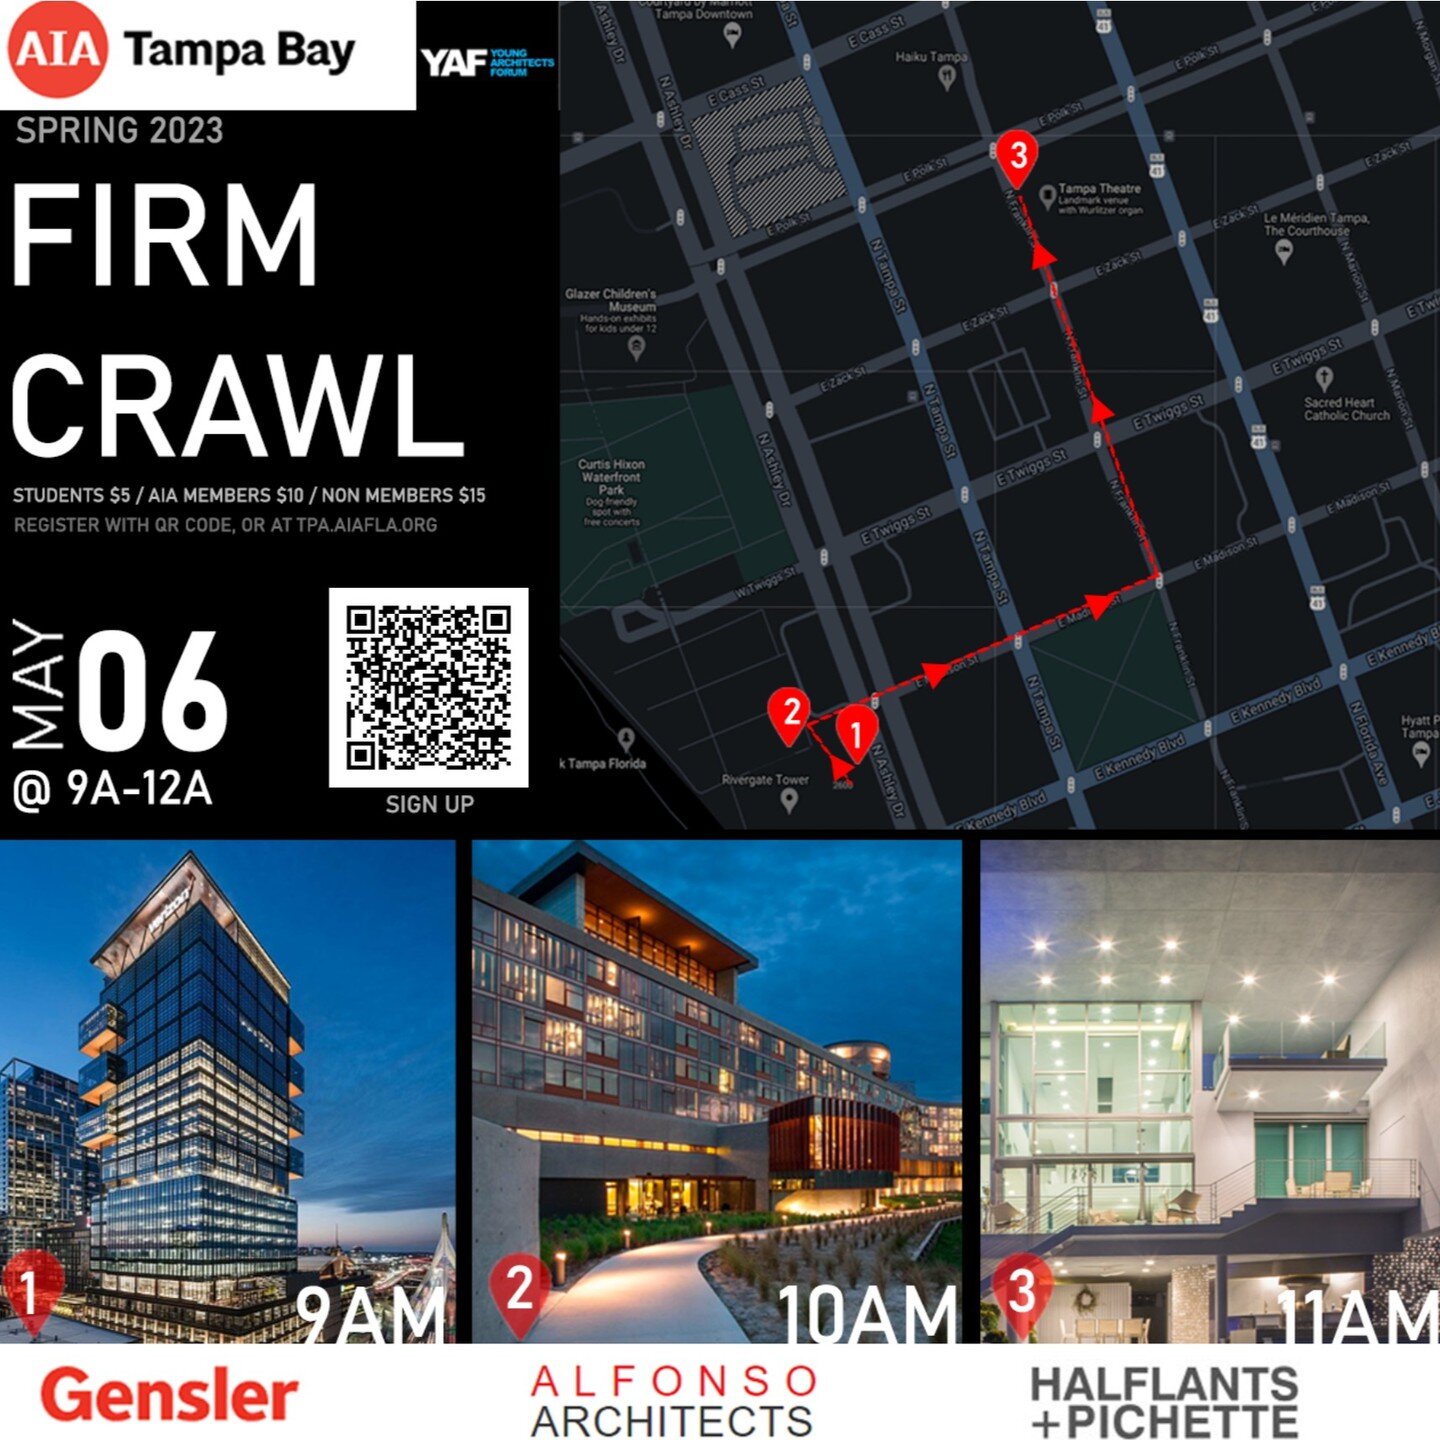 Join us on Saturday, May 6th for our Spring Firm Crawl from 9AM -12PM!

$5 students
$10 members
$15 nonmembers

Register today:
https://tinyurl.com/aiaspringfirmcrawl